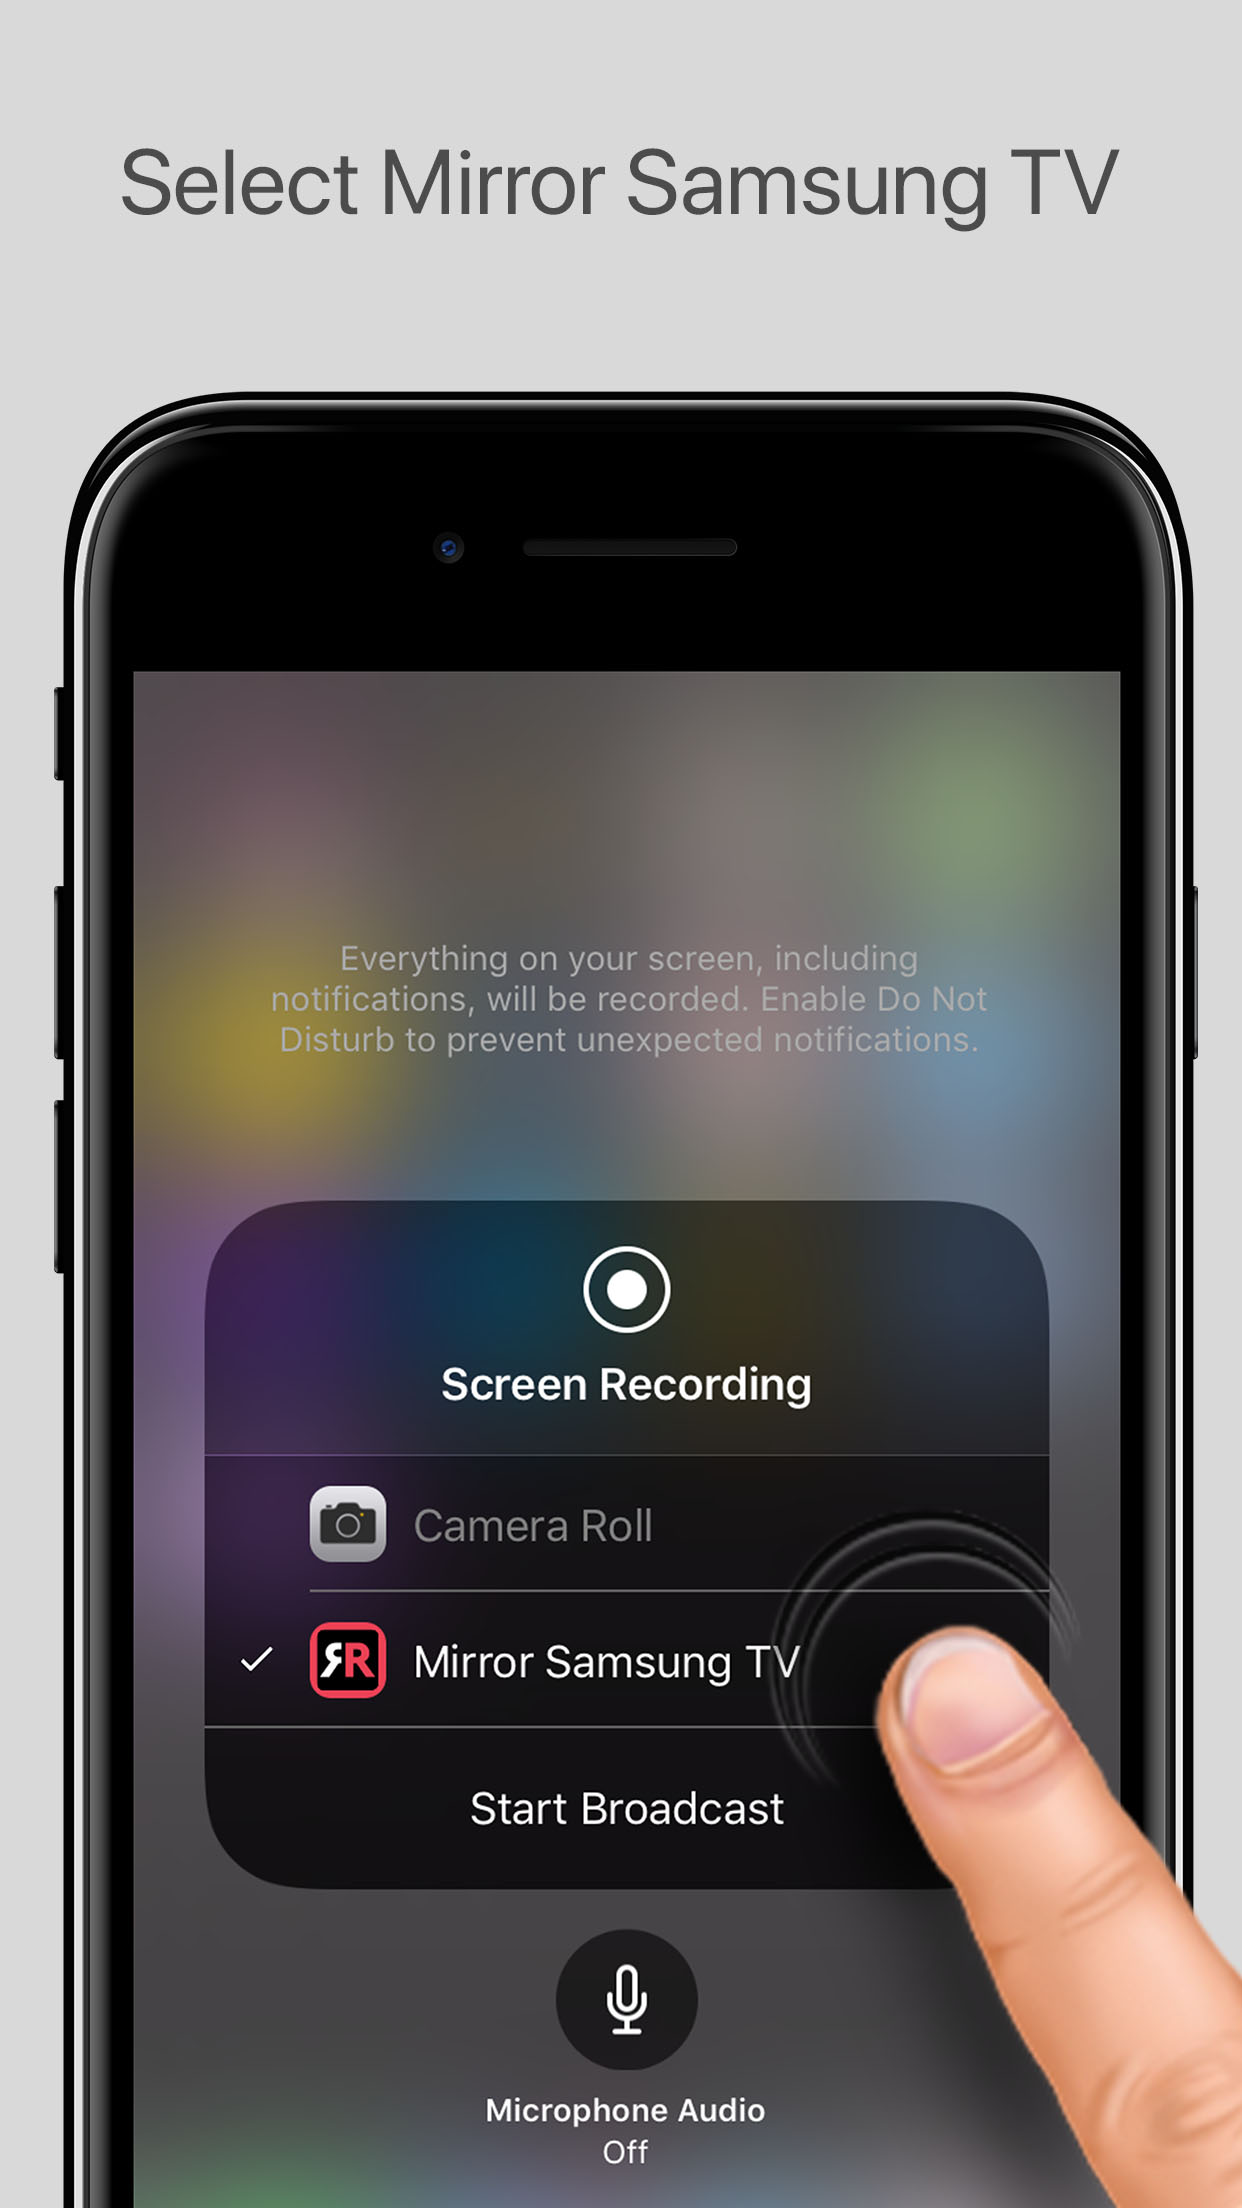 Mirror Your Iphone Or Ipad On A Smart Tv, How To Screen Mirror An Iphone Lg Smart Tv